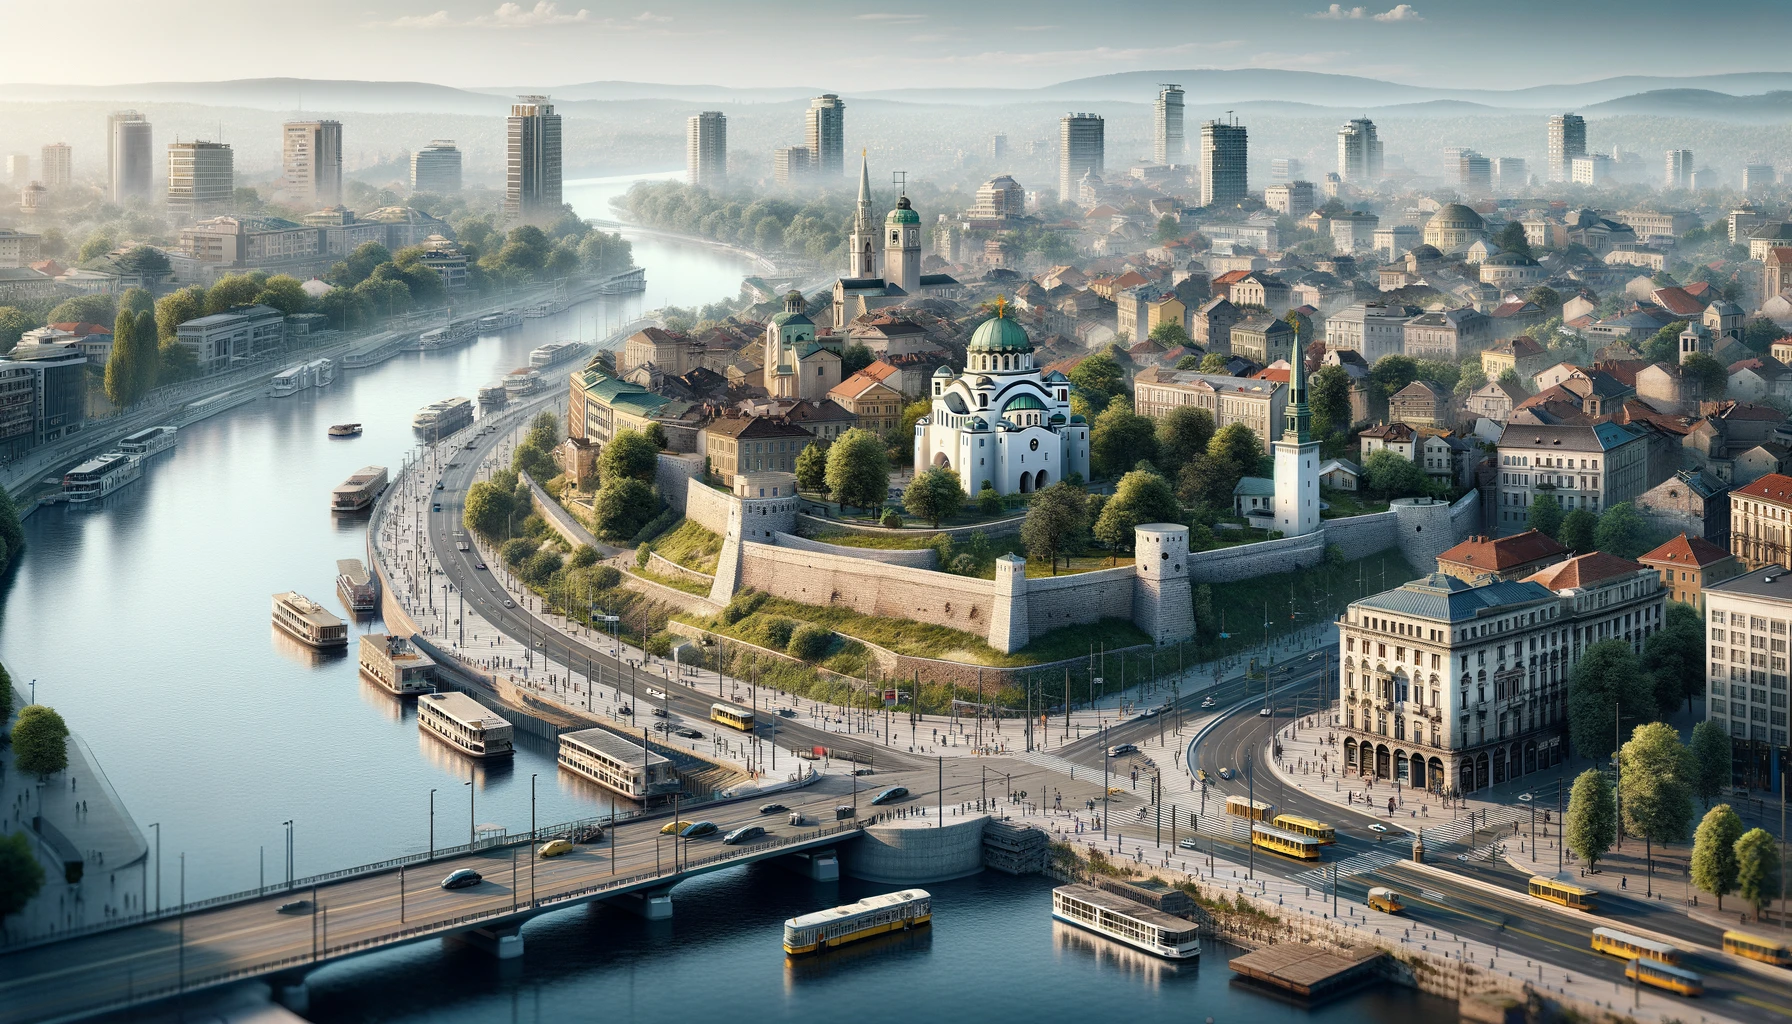 <p>Belgrade offers a vibrant lifestyle at an affordable price. Known for its nightlife, historical architecture, and friendly locals, it’s possible to live comfortably in Belgrade on a tight budget. The city’s mix of Eastern and Western cultures creates a unique and intriguing atmosphere.</p>